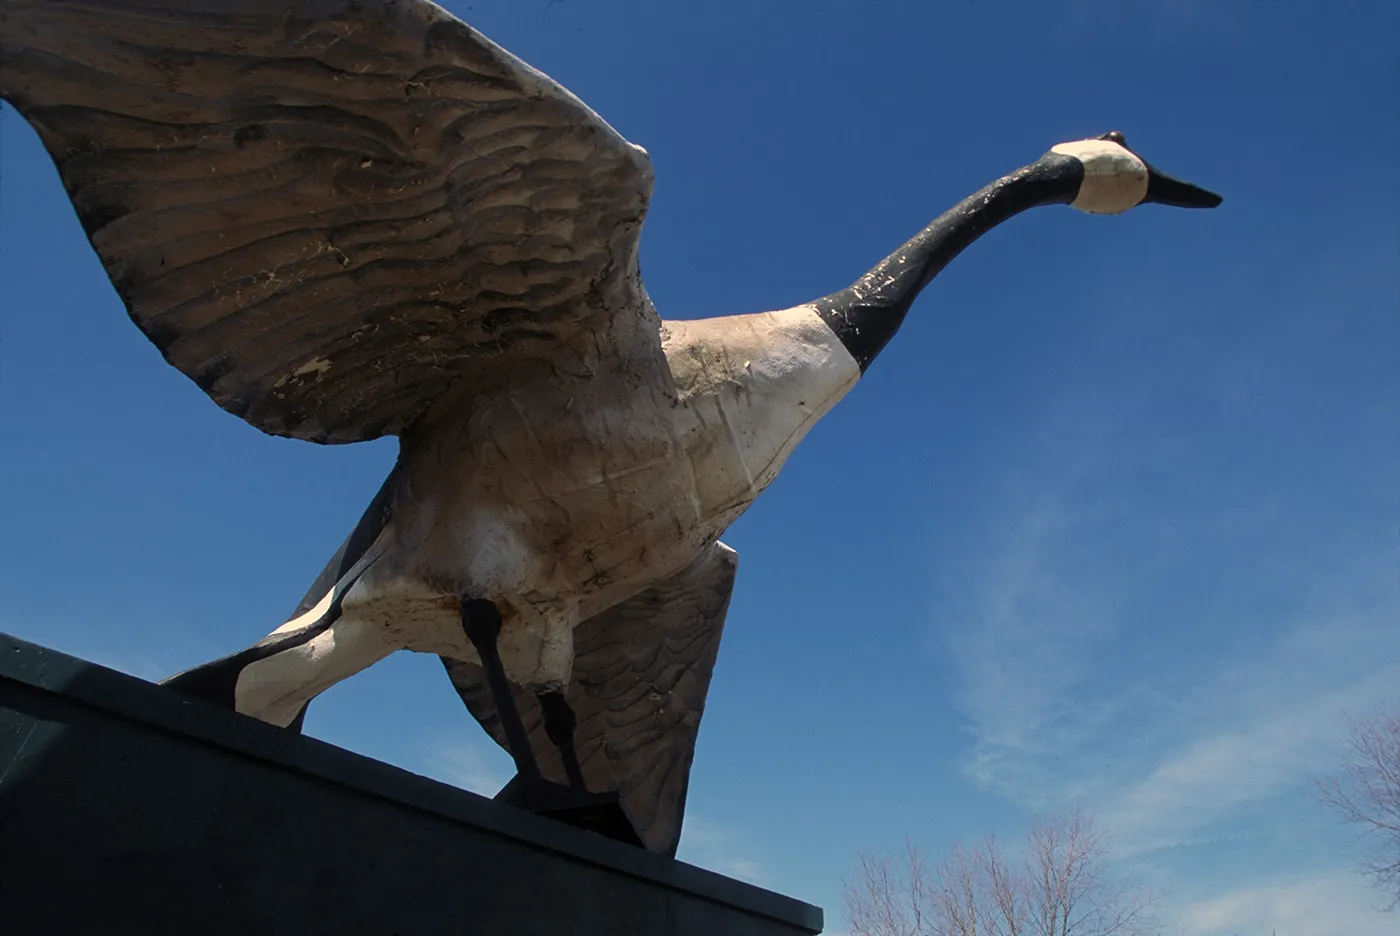 The World's Largest Goose, Sumner, MO.  One of the sites featured in the feature documentary World's Largest. www.worldslargestdoc.com